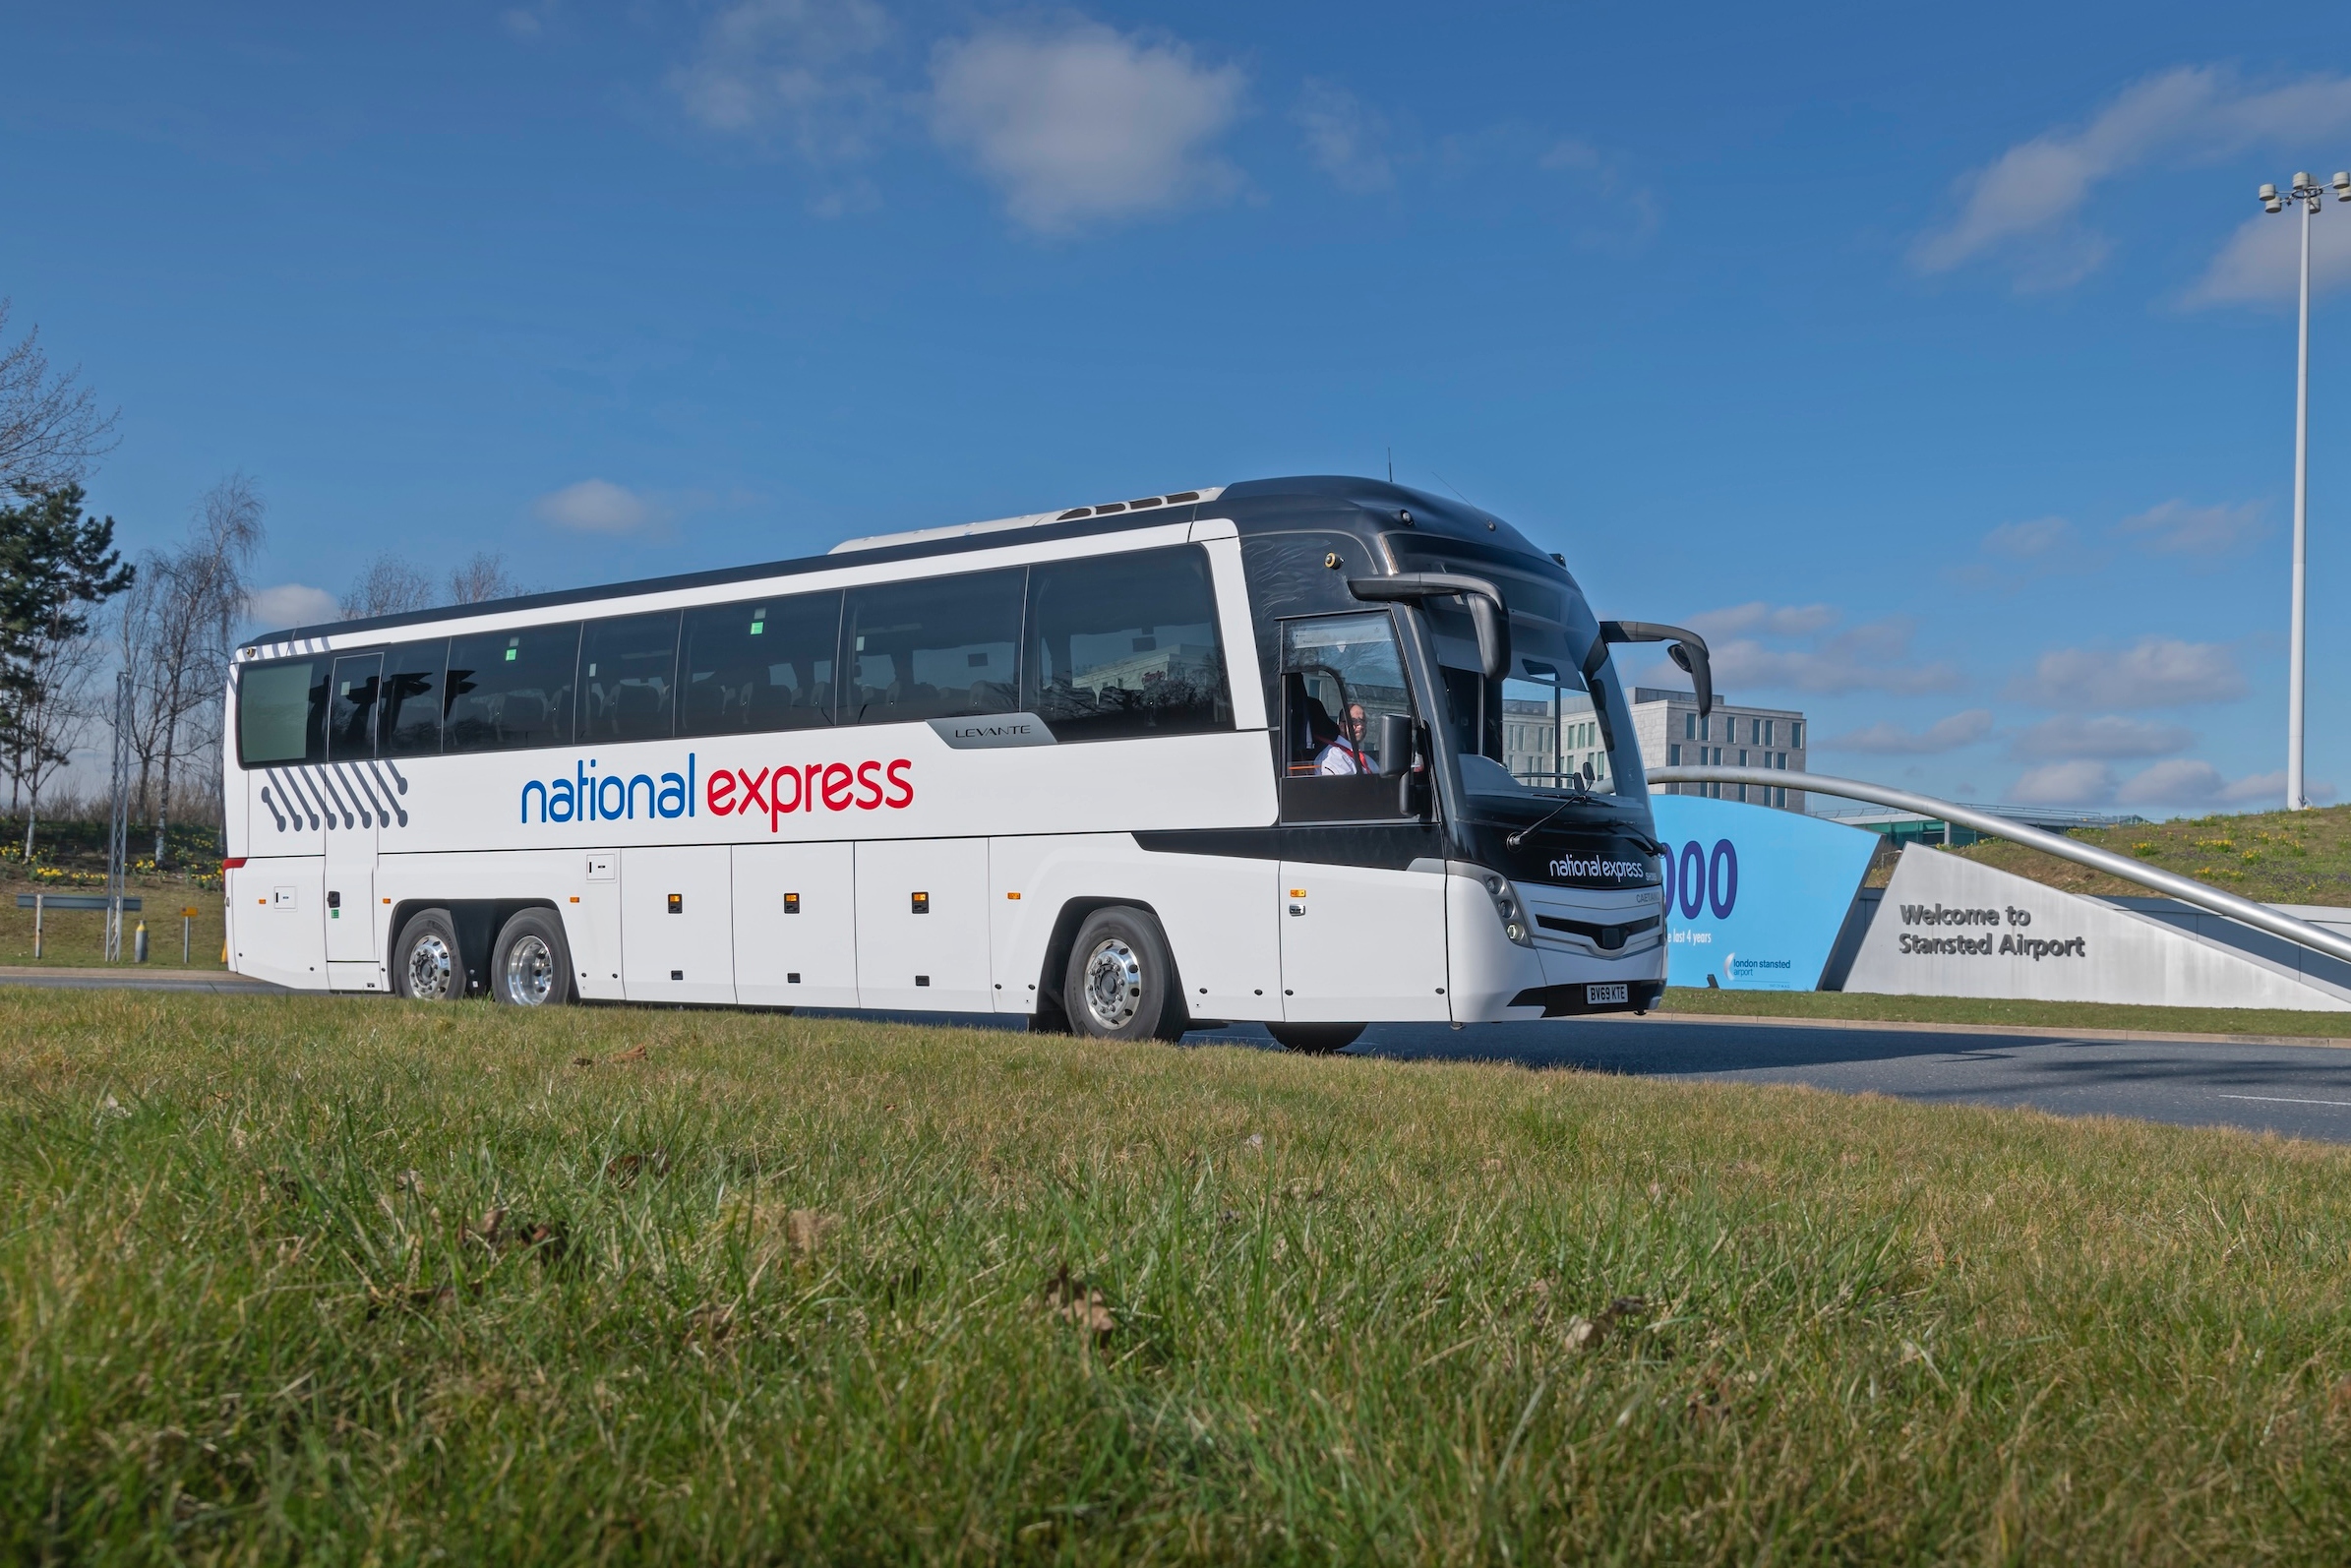 NatEx speeds up London/Stansted journey times